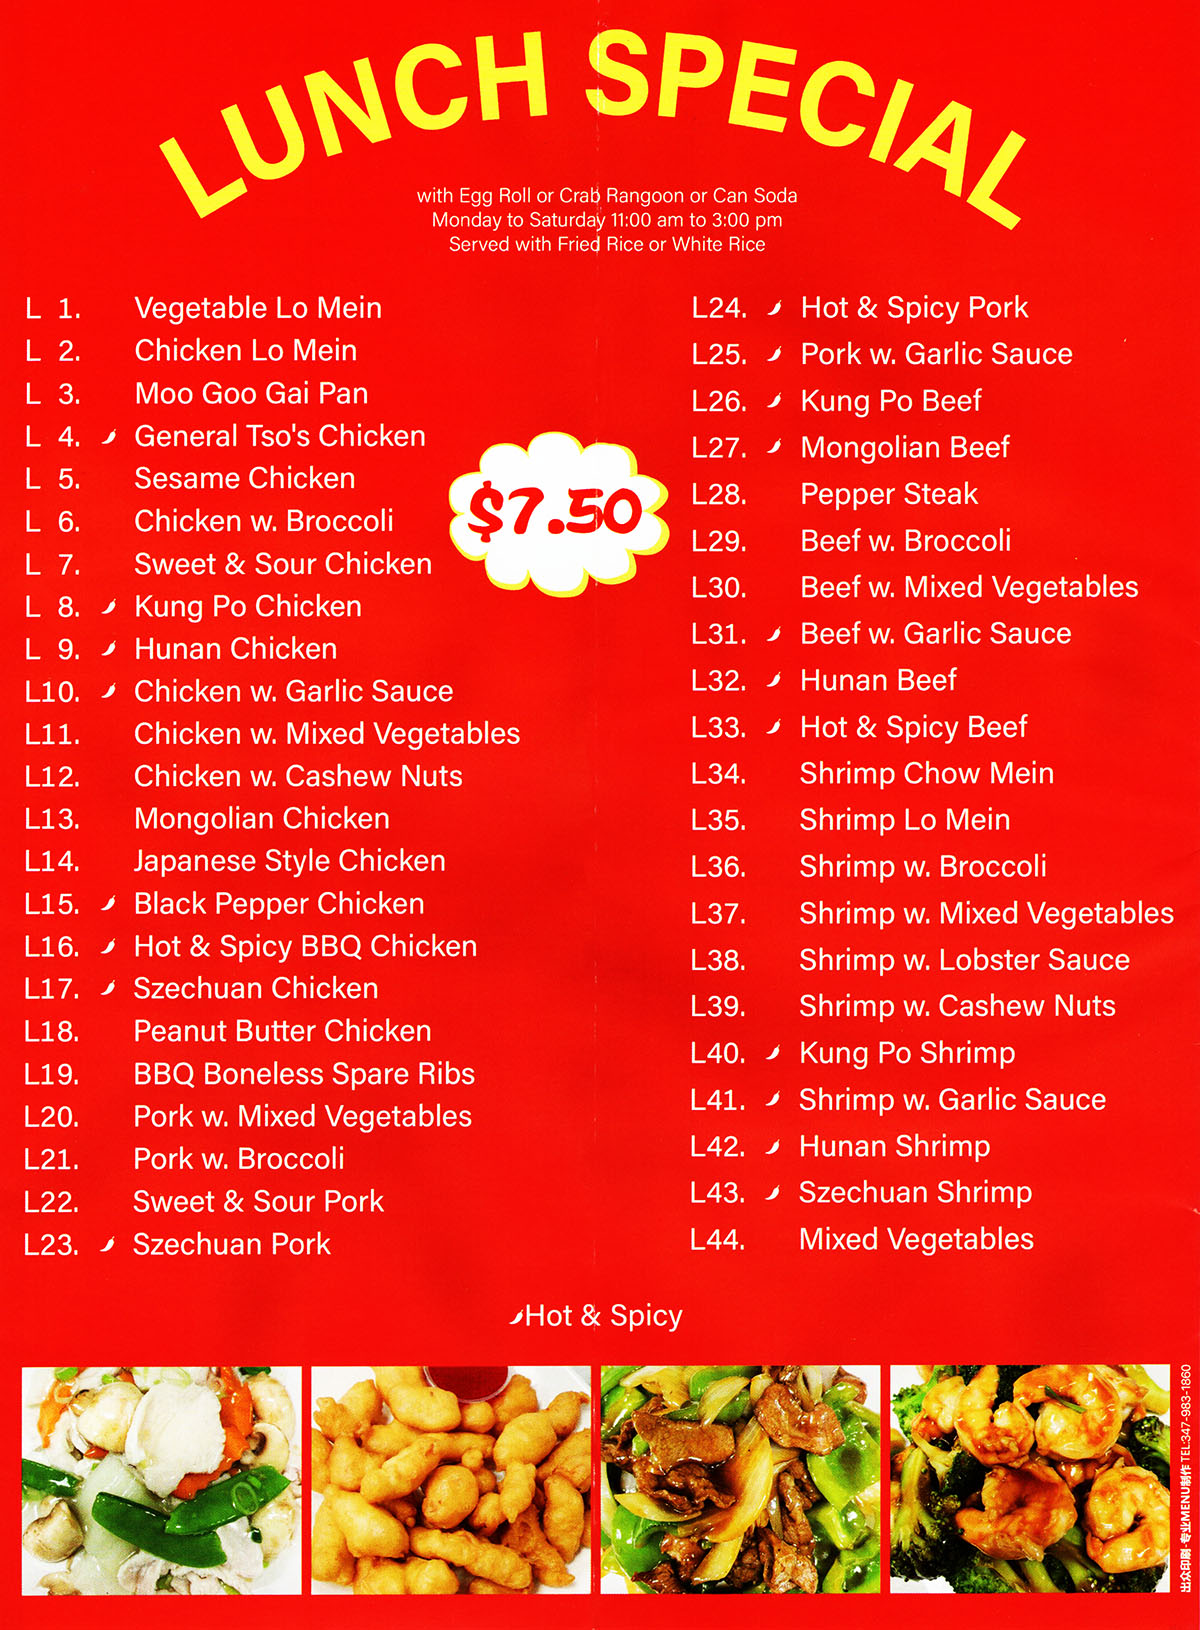 China Garden Chinese Restaurant Menu Page 7
Lunch Specials $5.75
Monday to Saturday: 11:00am to 3:00pm
Served with Fried Rice or White Rice or Brown Rice
L 1. Chicken Chow Mein
L 2. Chicken Lo Mein
L 3. Moo Goo Gai Pan
L 4. **General Tso's Chicken
L 5. SesameChicken 
L 6. Chicken w. Broccoli 
L 7. Sweet & Sour Chicken
L 8. **Kung Po Chicken
L 9. **Hunan Chicken
L 10. **Chicken w. Garlic Sauce
L 11. Chicken w. Mixed Vegetable
L 12. Chicken w. Cashew Nut
L 13. Mongolian Chicken
L 14. Japanese Style Chicken
L 15. **Black Pepper Chicken
L 16. **Hot & Spicy BBQ Chicken
L 17. Bang Bang Chicken
L 18. Peanut Butter Chicken
L 19. BBQ Boneless Spare Ribs
L 20. Pork w. Mixed Vegetable
L 21. Pork w. Broccoli
L 22. Sweet & Sour Pork
L 23. **Szechuan Shredded Pork
L 24. **Hot & Spicy Shredded Pork
L 25. **Shredded Pork w. Garlic Sauce
L 26. **Kung Po Beef
L 27. Mongolian Beef
L 28. Pepper Steak
L 29. Beef w. Broccoli
L 30. Beef w. Mixed Vegetable
L 31. **Beef w. Garlic Sauce
L 32. **Hunan Beef
L 33. **Hot & Spicy Beef
L 34. Shrimp Chow Mein
L 35. Shrimp Lo Mein
L 36. Shrimp w. Broccoli
L 37. Shrimp w. Mixed Vegetable
L 38. Shrimp w. Lobster Sauce
L 39. Shrimp w. Cashew Nut
L 40. **Kung Po Shrimp
L 41. **Shrimp w. Garlic Sauce
L 42. **Hunan Shrimp
L 43. **Szechuan Shrimp
L 44. Mixed Vegetable
Menu Provided By: Metro Dining Delivery www.MetroDiningDelivery.com 402-474-7335